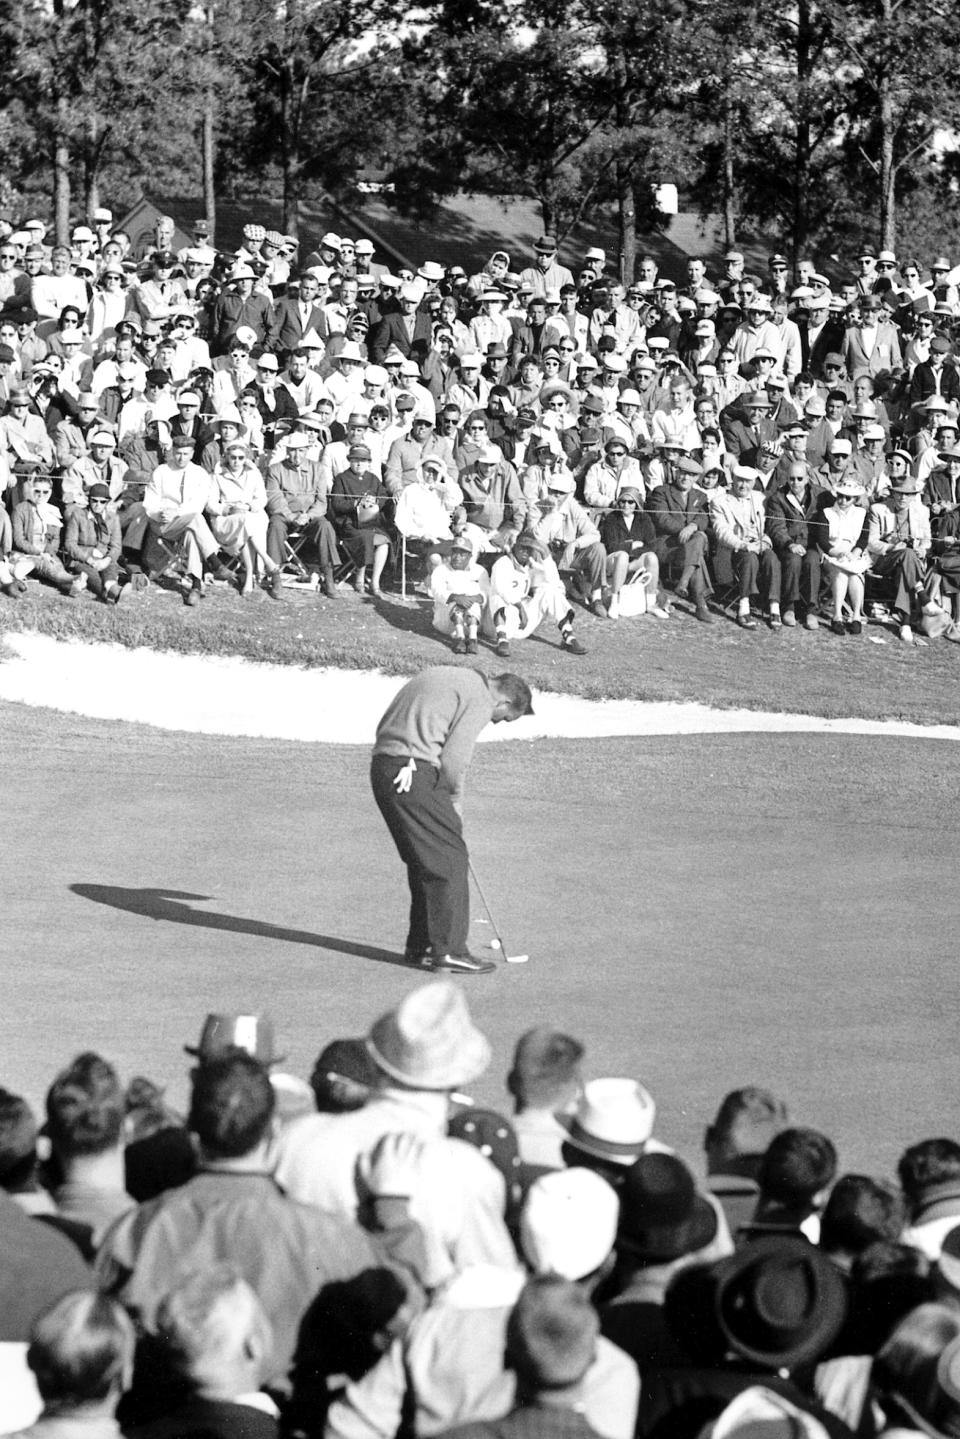 FILE - In this April 10, 1960, file photo, Arnold Palmer makes his final putt before his victory at the Masters Golf Tournament in Augusta, Ga. There is no Masters this year because of the COVID-19 pandemic, the first time there is no golf at Augusta National the first full week in April since the end of World War II in 1945. (AP Photo/File)